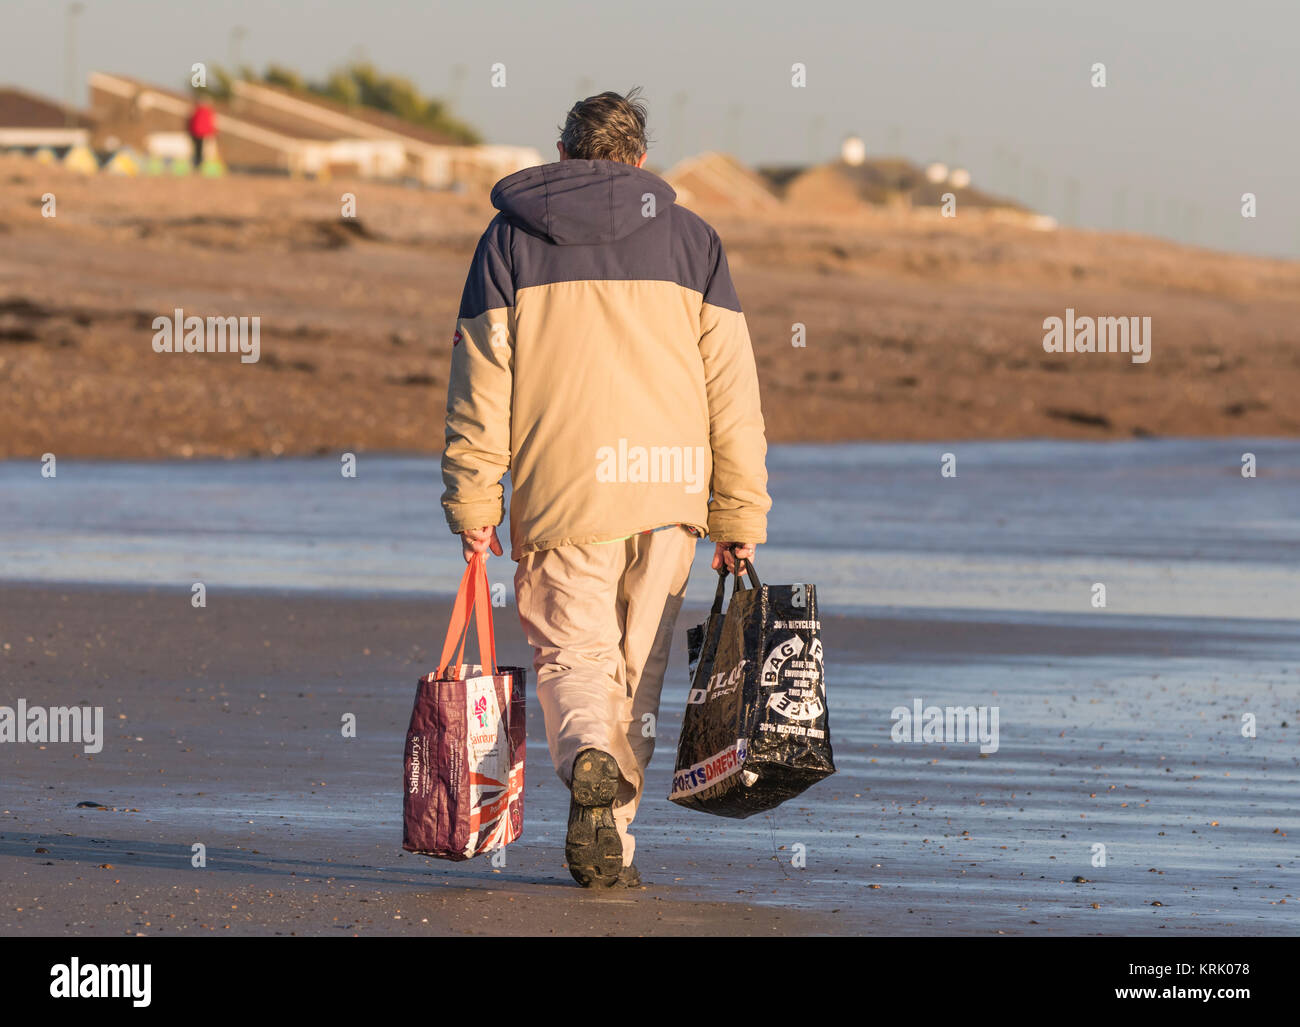 Man walking on a beach carrying shopping bags in the UK. Stock Photo